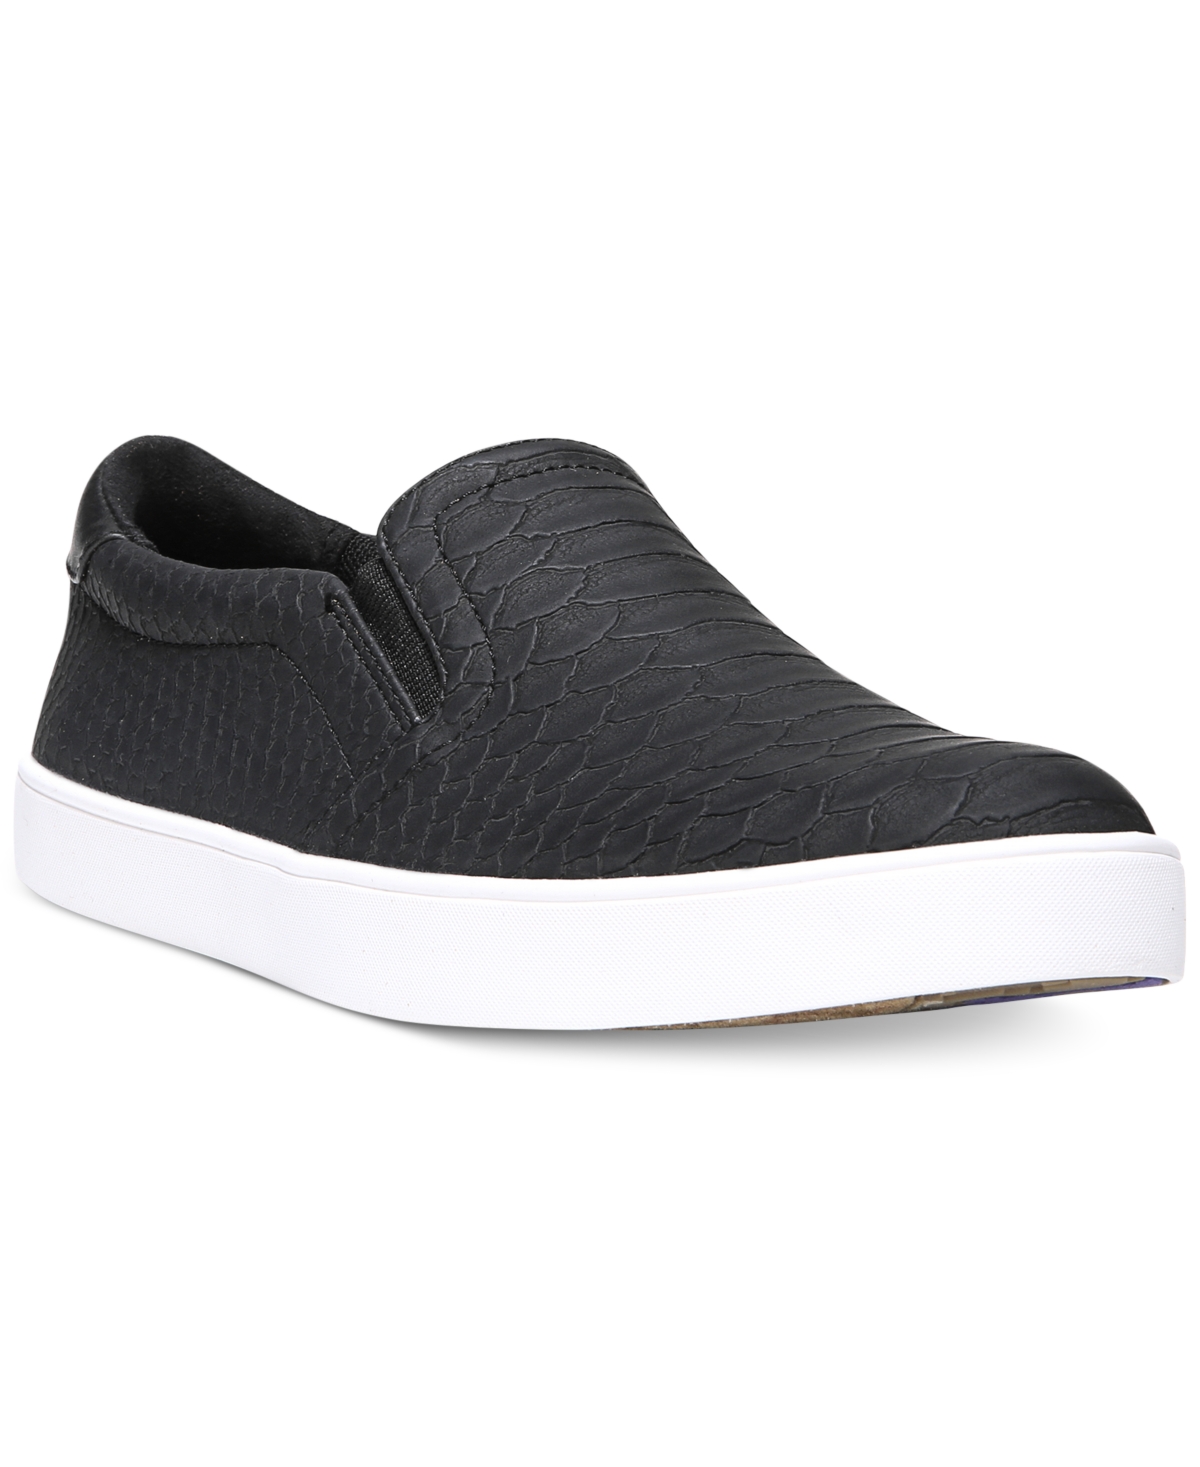 UPC 727679380188 product image for Dr. Scholl's Women's Madison Slip on Sneakers Women's Shoes | upcitemdb.com